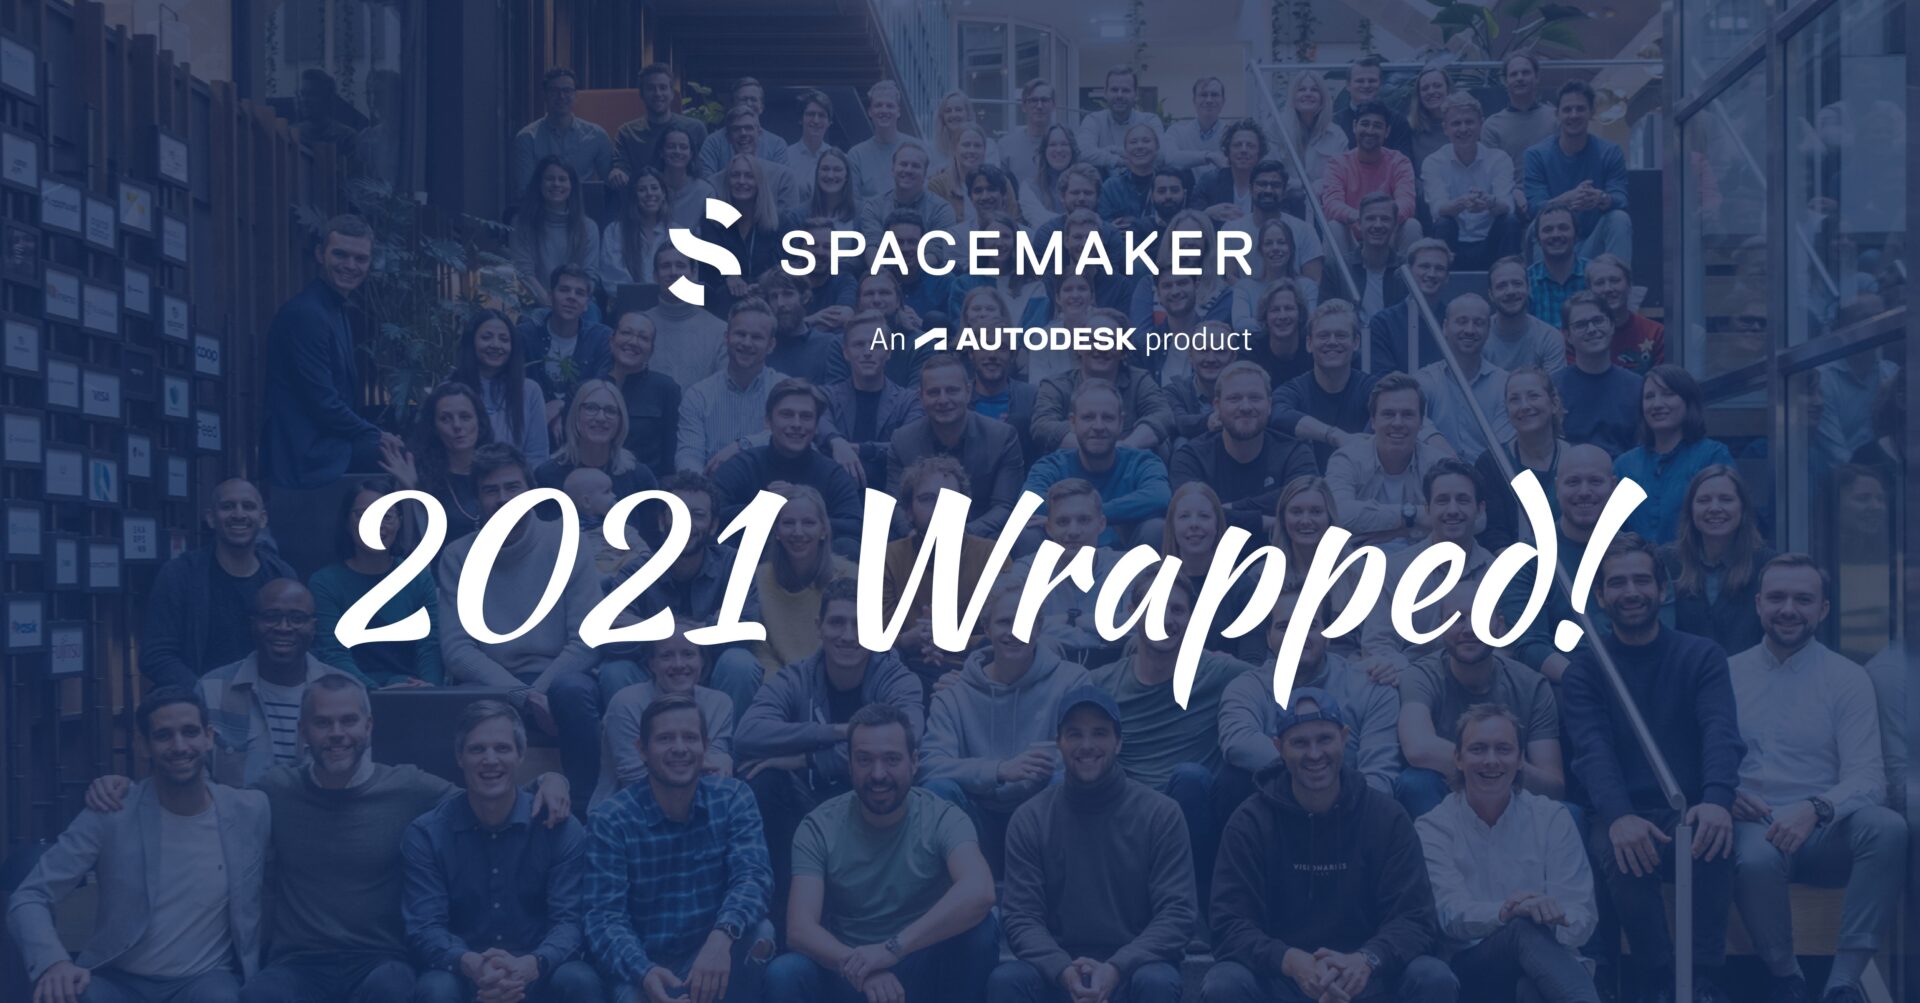 2021 Wrapped: Every new feature and update we released